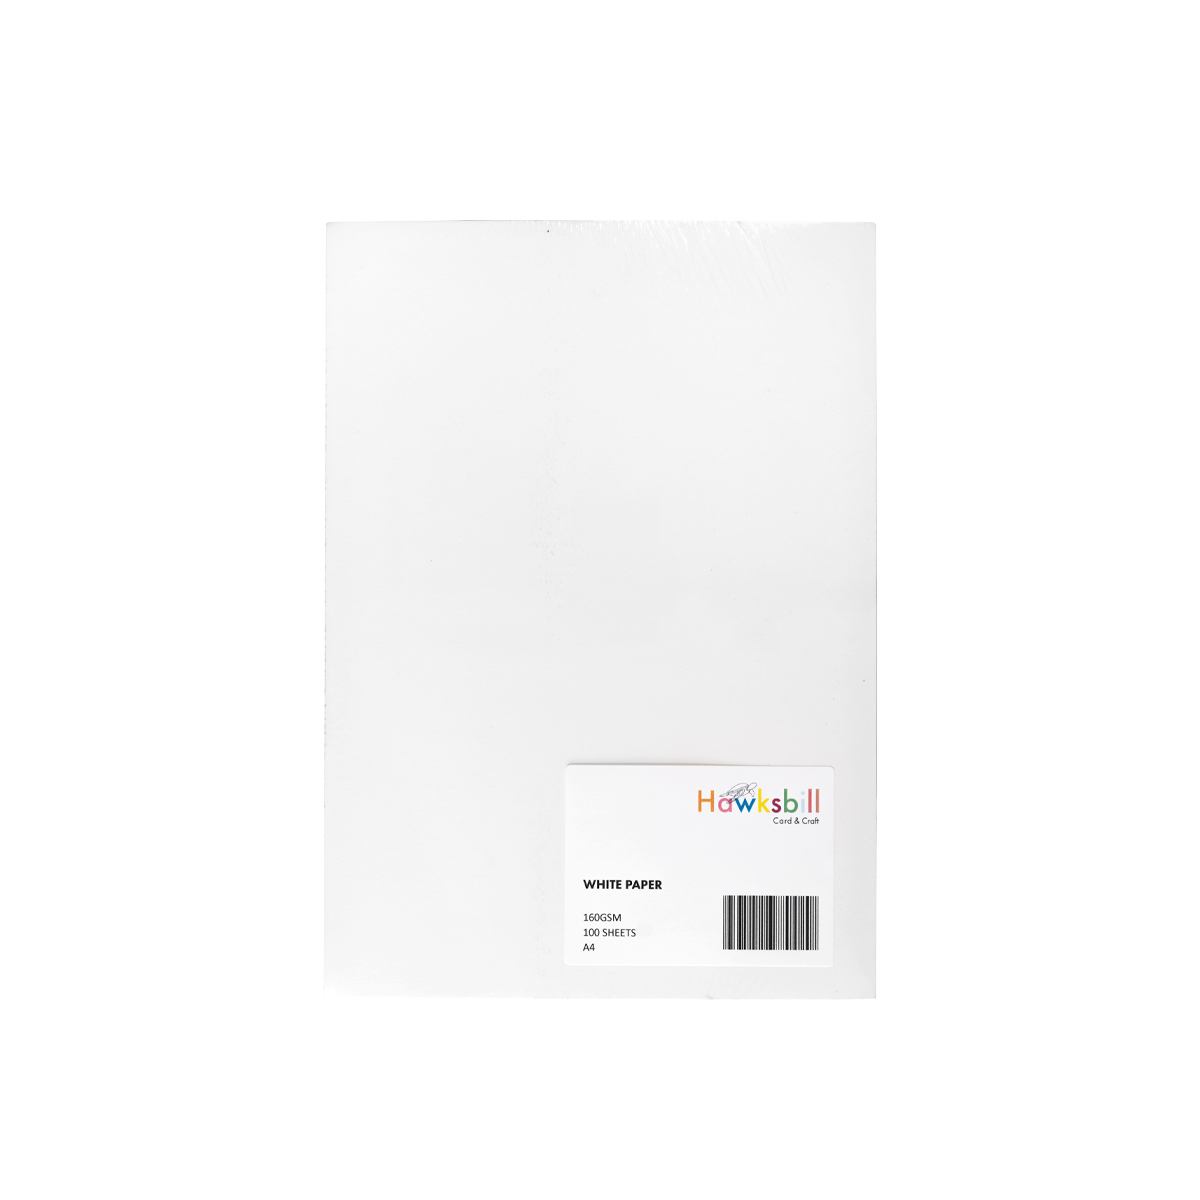 VAT DIGITAL WHITE CARD BY DCP 160 GSM A4 CARD 1,000 SHEETS  £19.00 